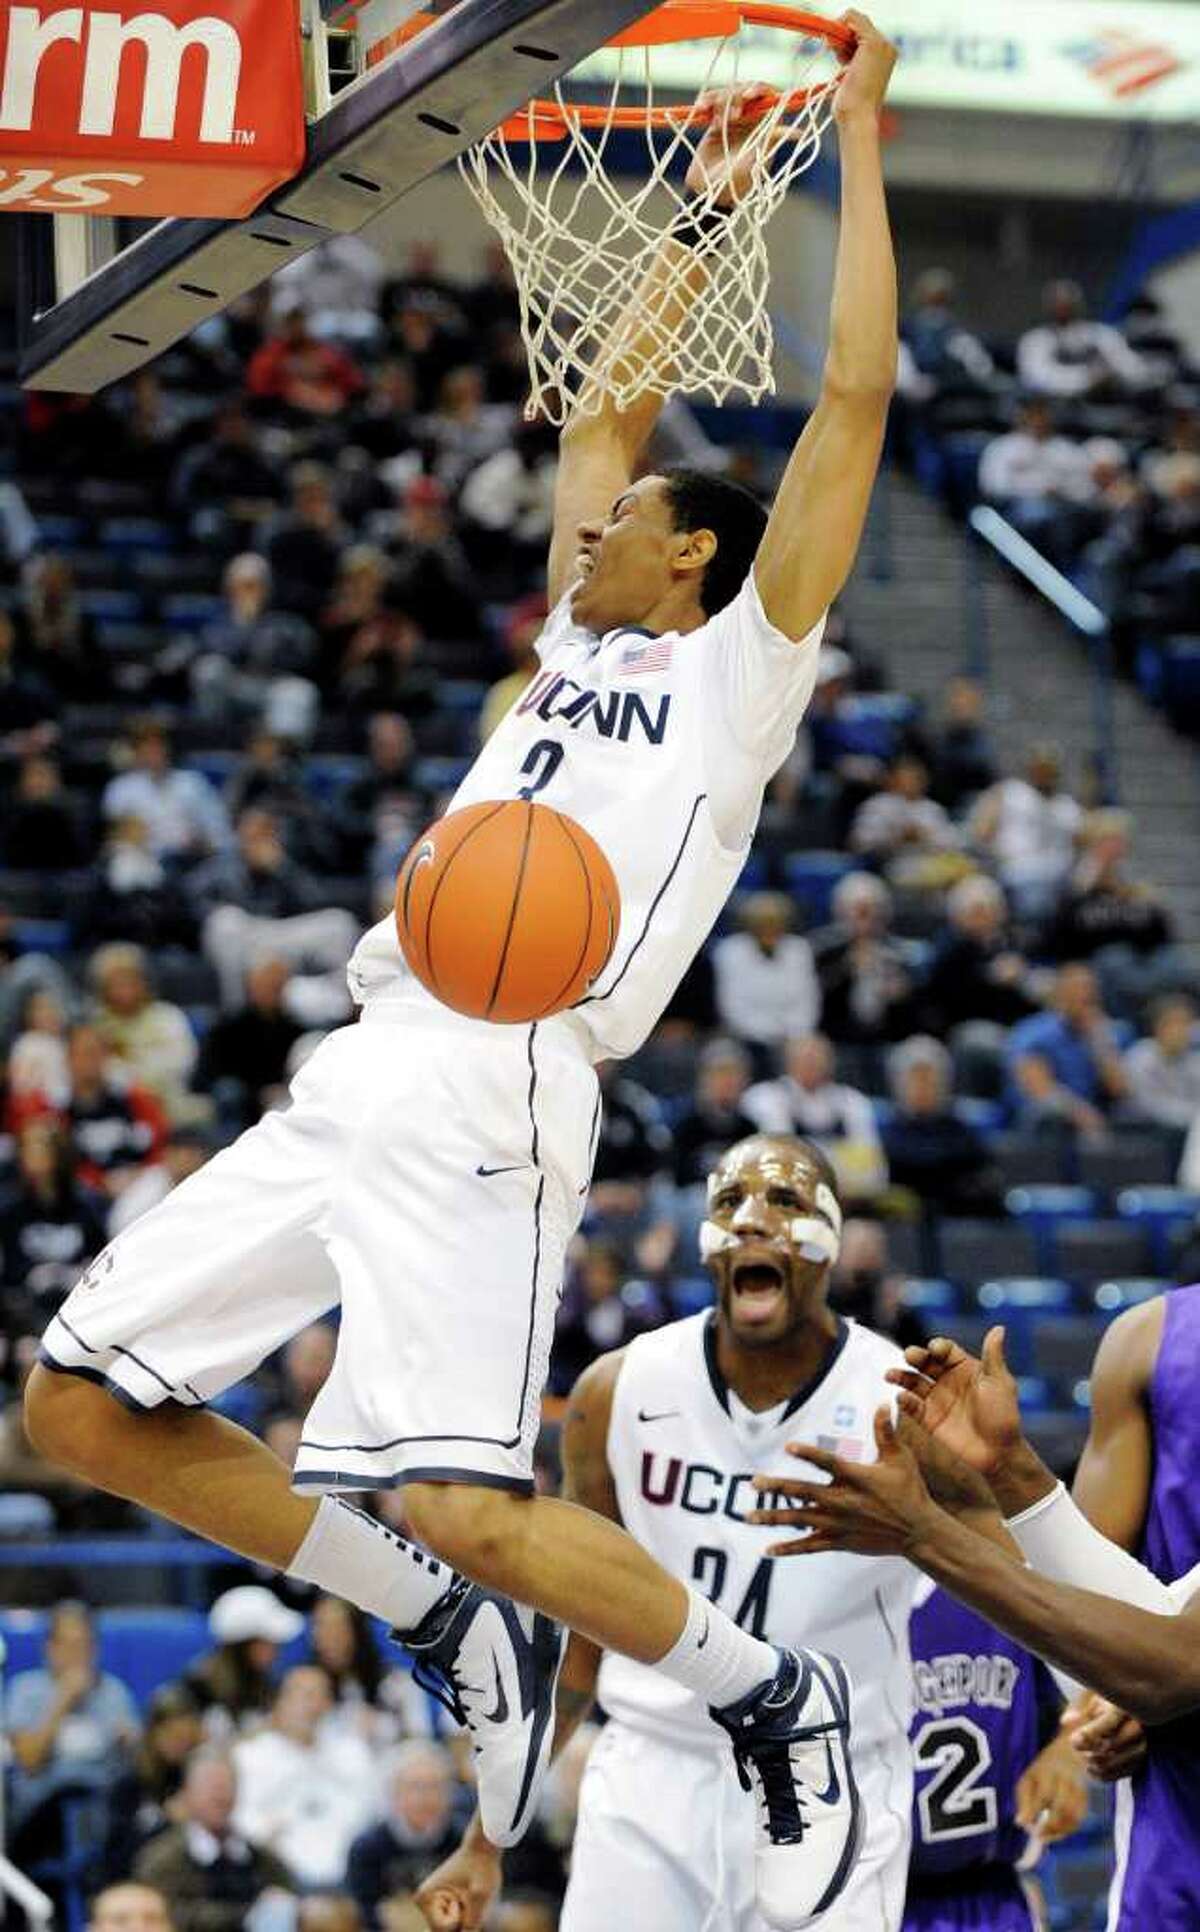 Connecticut's Jeremy Lamb, left, scores as teammate Alex Oriakhi looks on during the second half of Connecticut's 103-57 victory over Bridgeport in an exhibition NCAA college basketball game in Hartford, Conn., on Sunday, Nov. 7, 2010. Lamb, a freshman, scored 17 points and had eight rebounds. (AP Photo/Fred Beckham)